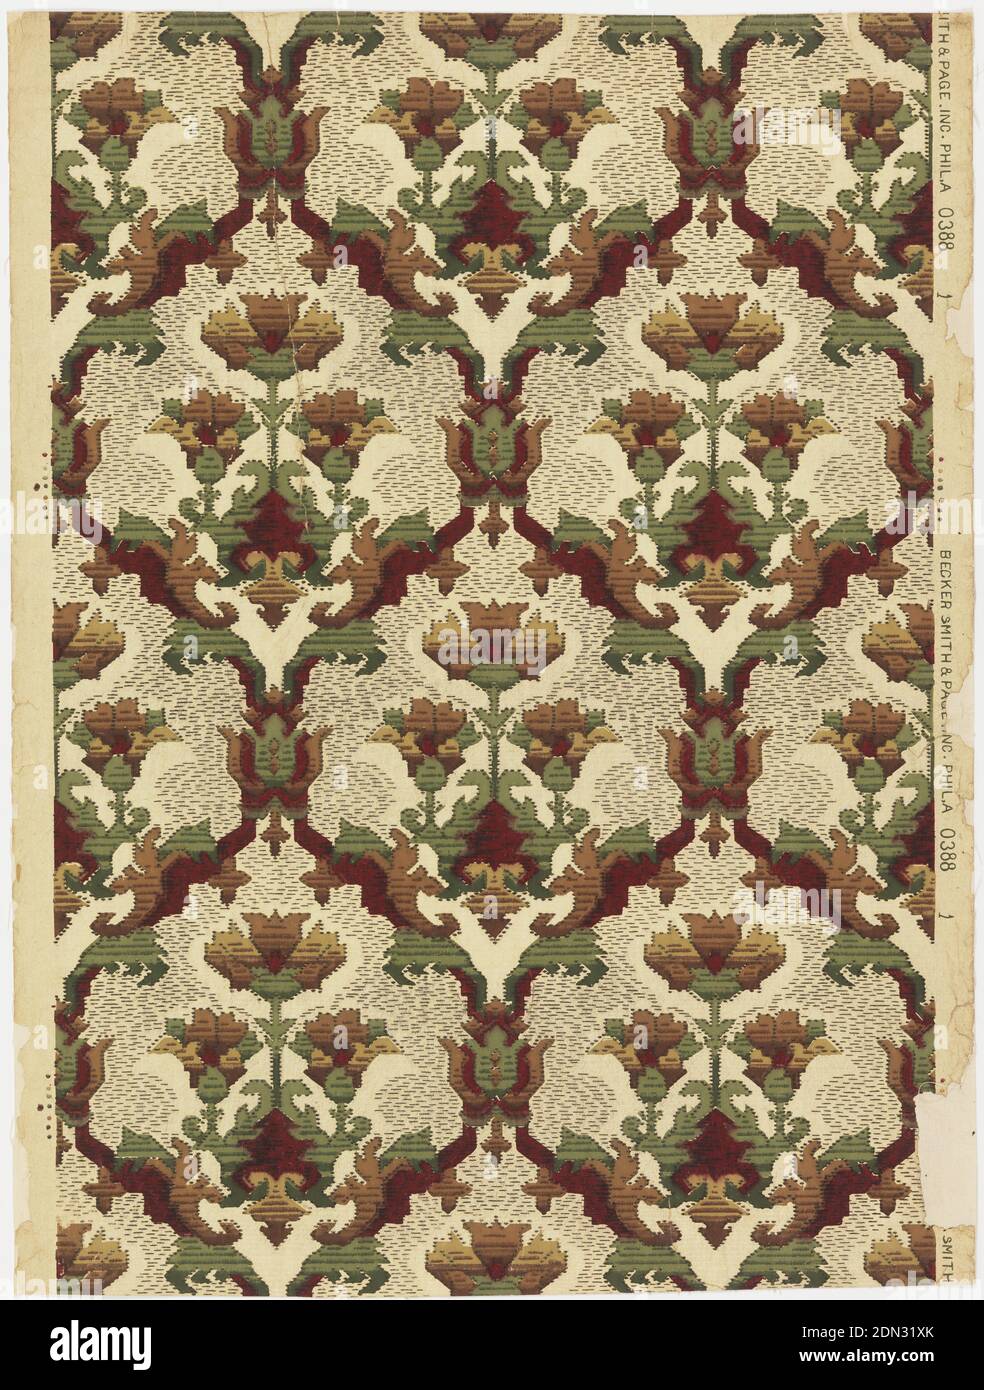 Sidewall, Becker, Smith & Page, Inc., founded 1899, Machine-printed, Conventionalized design. A trefoil effect of three flowers in brown and red growing on straight, upright stems, enclosed in a four-sided, diamond shaped or diaper framework of foliage. Portions of background consist of short, irregular, broken lines in black giving the effect of a woven fabric showing the woof [sic] threads running horizontally. On selvedge is printed: 'Becker, Smith & Page, Inc. Phila. - 0388'., Philadelphia, Pennsylvania, USA, 1900–1910, Wallcoverings, Sidewall Stock Photo